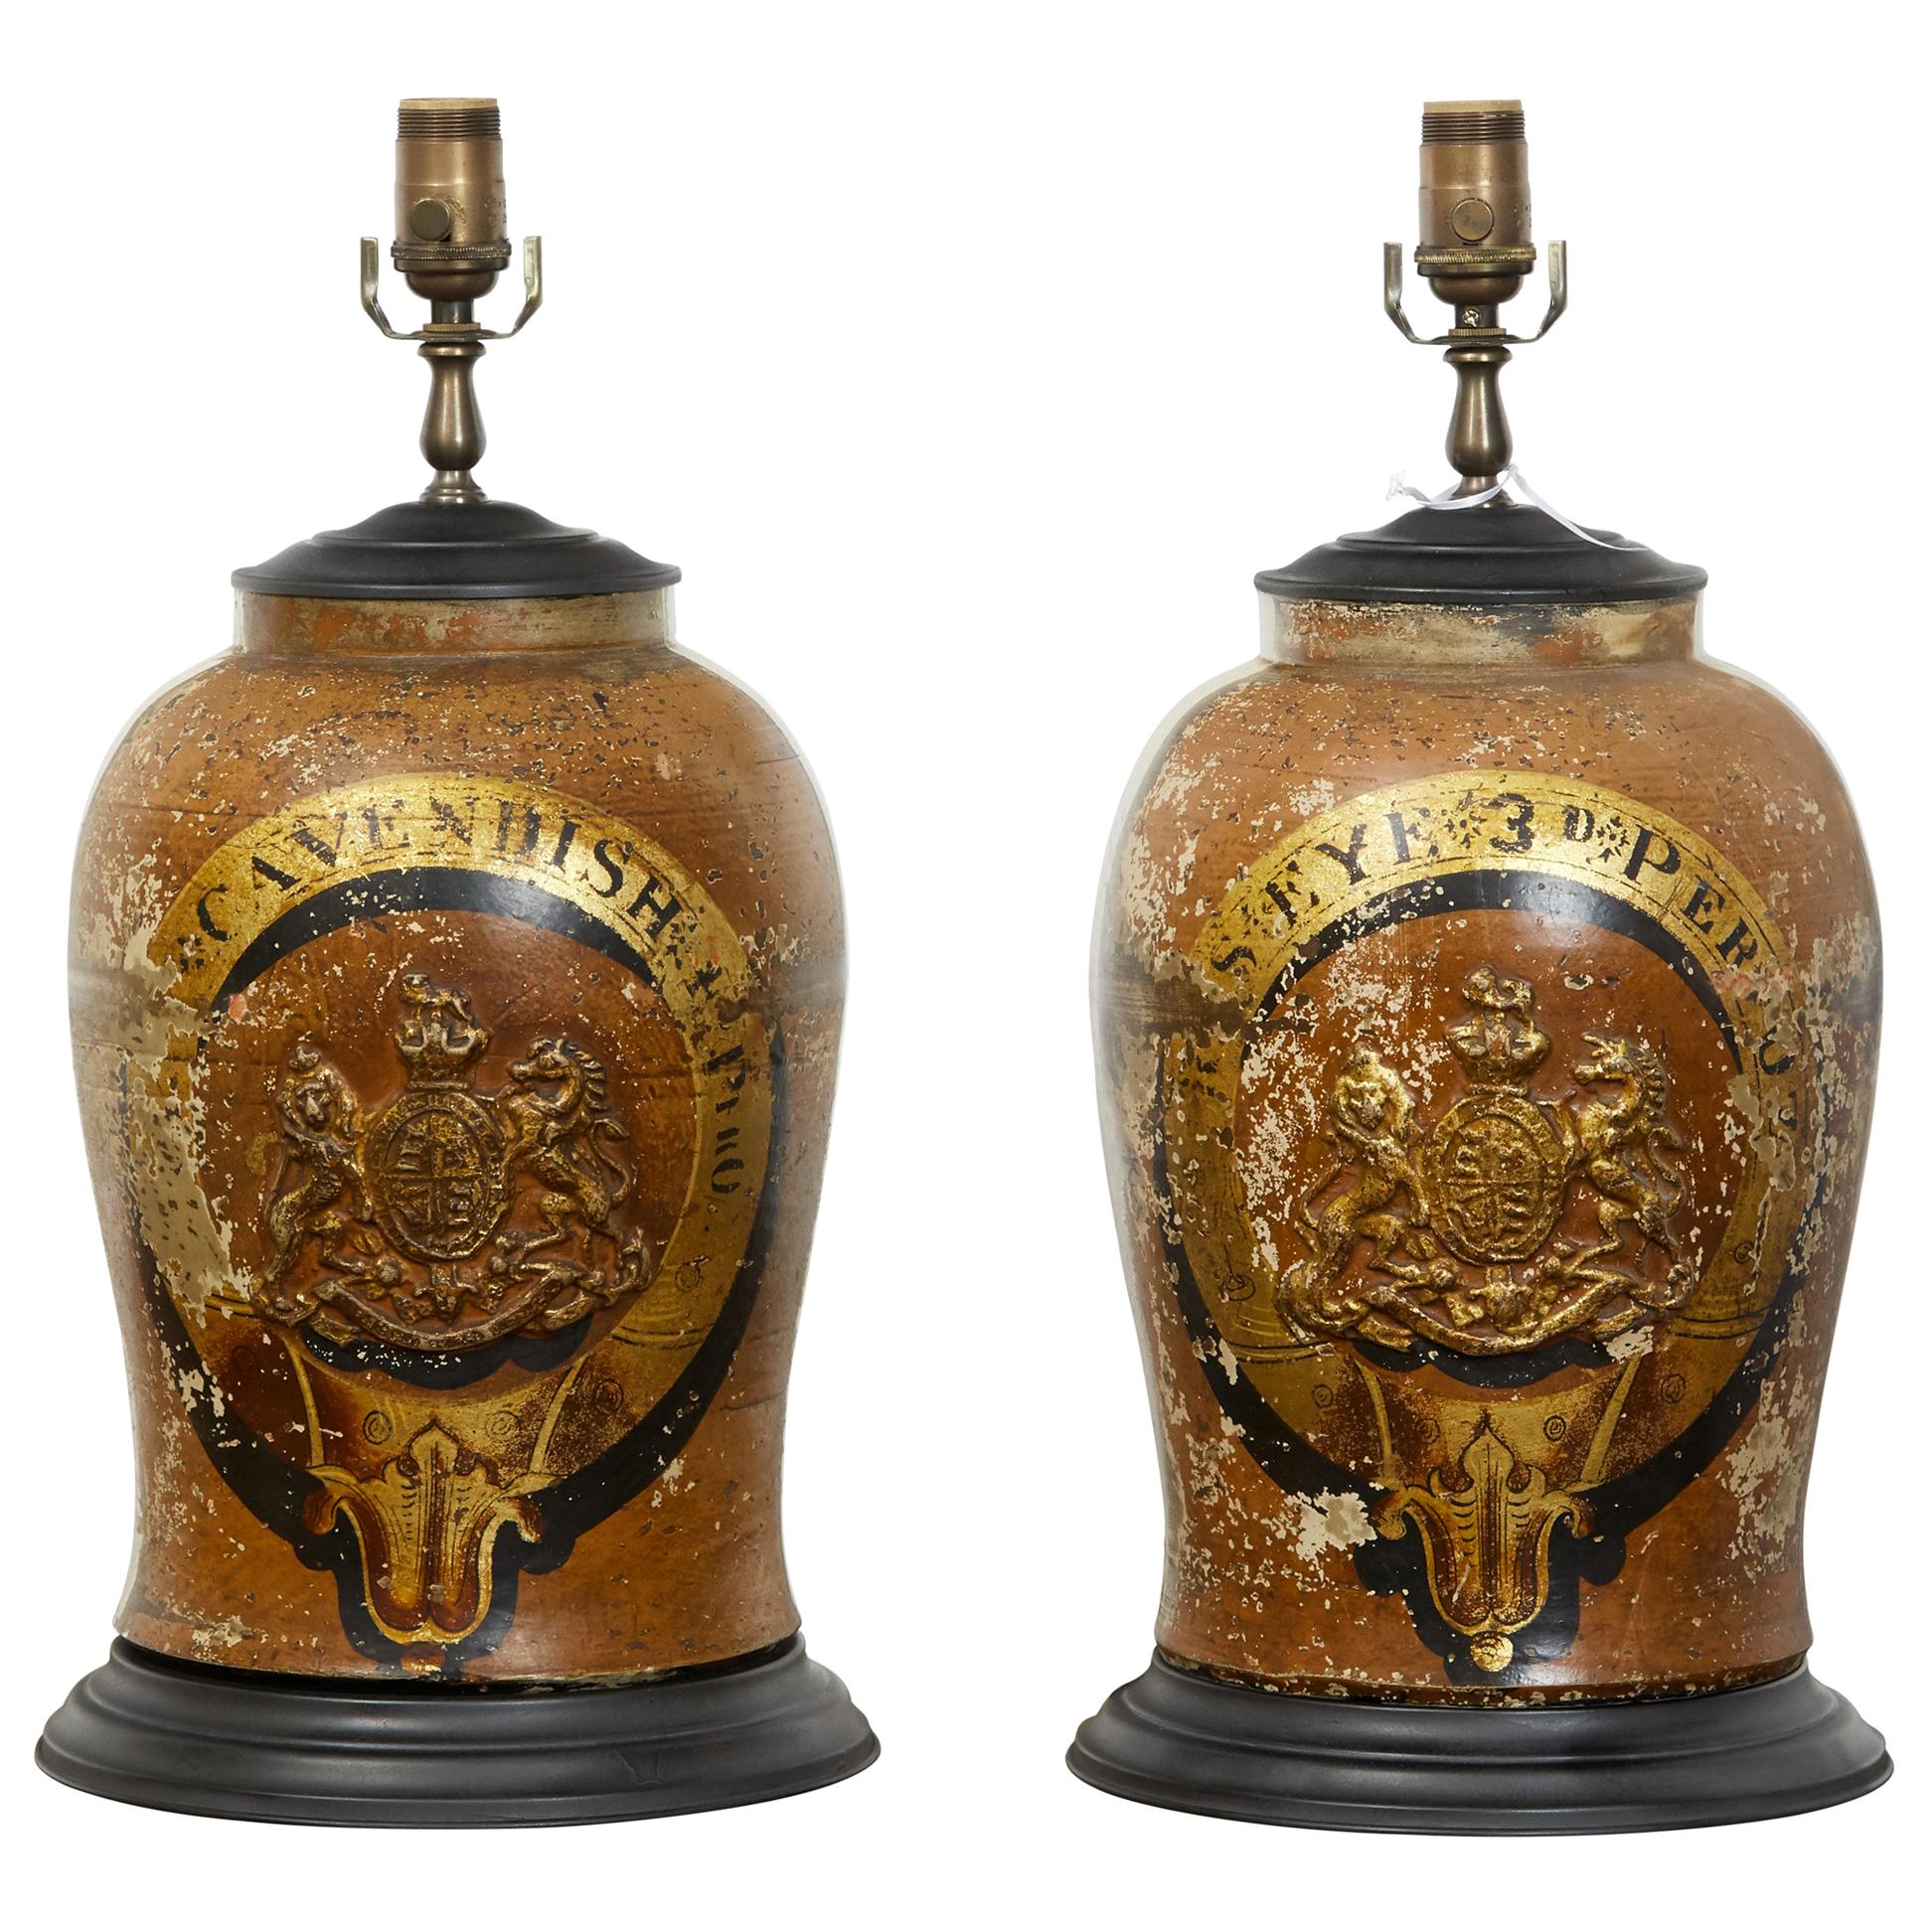 Pair of 1880s English Stoneware with Coat of Arms Made into Wired Table Lamps